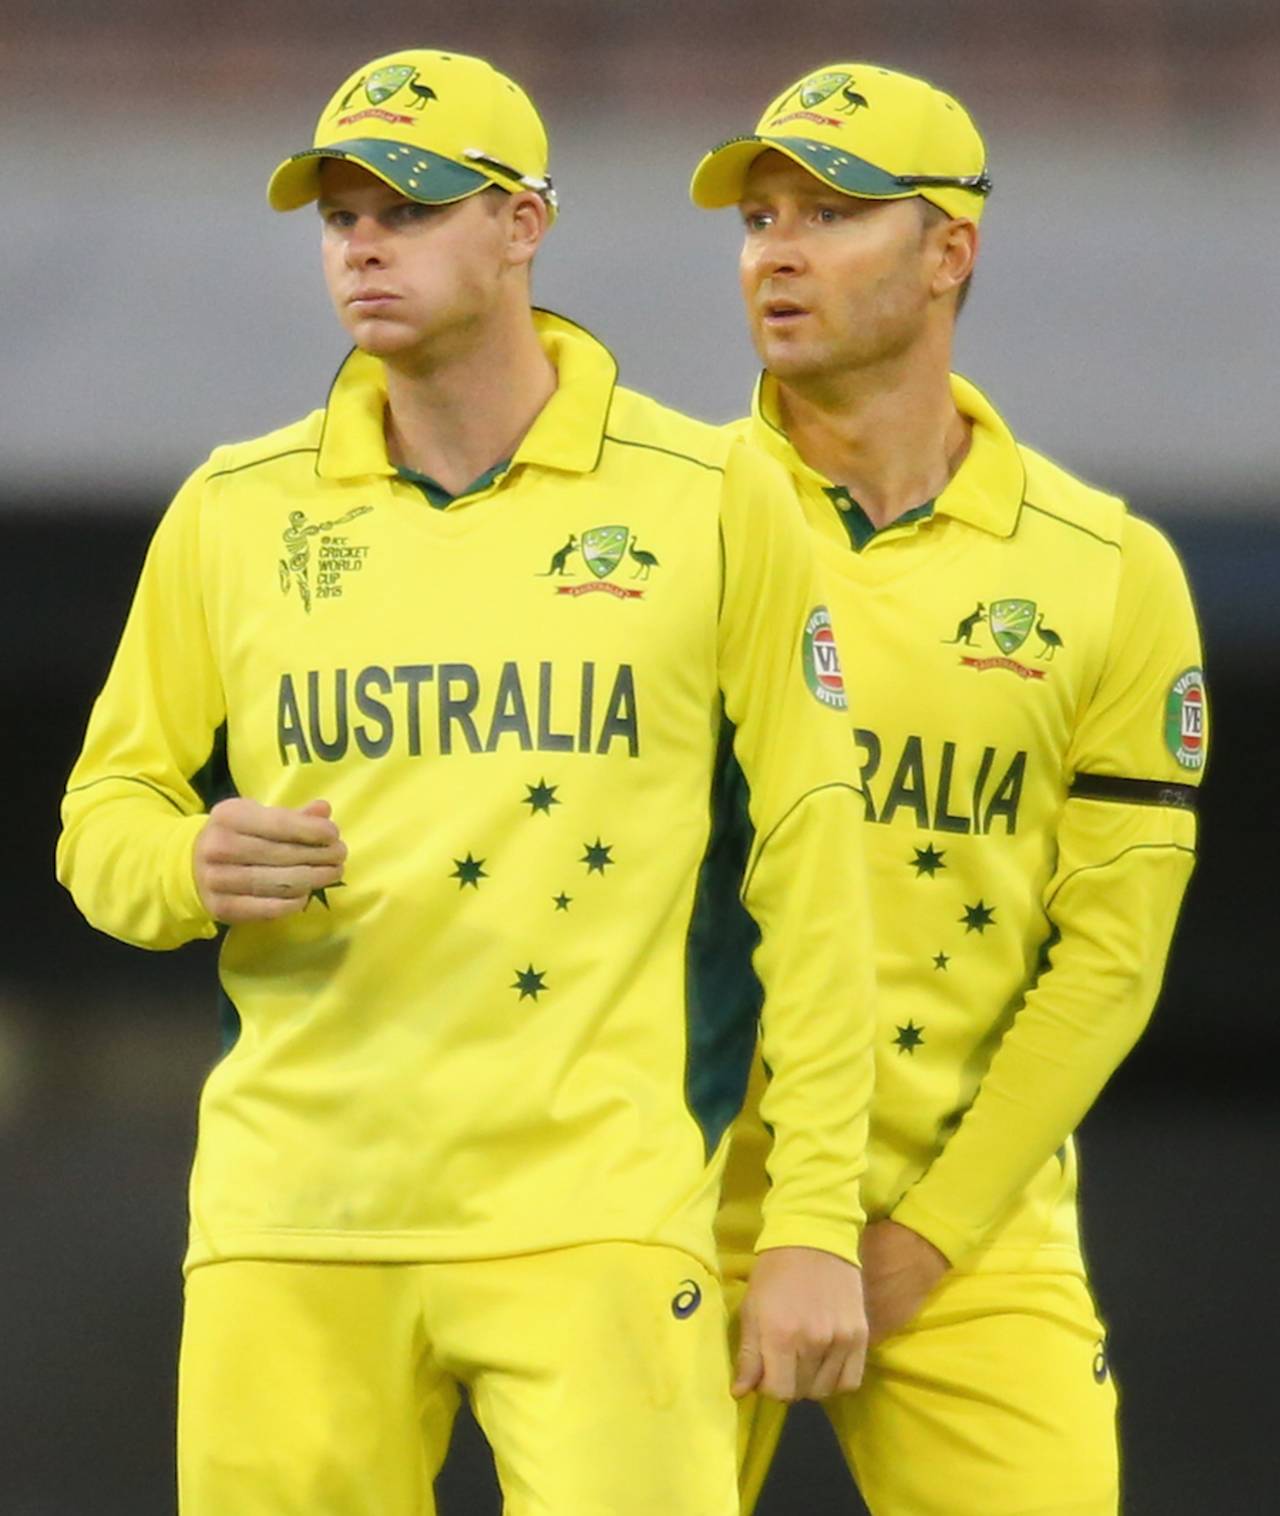 Aaron Finch - "When we were out there we ran a four and then a one back-to-back. I said 'that'll be front-page news tomorrow, that's your fitness test right there'. He seemed fine"&nbsp;&nbsp;&bull;&nbsp;&nbsp;Getty Images